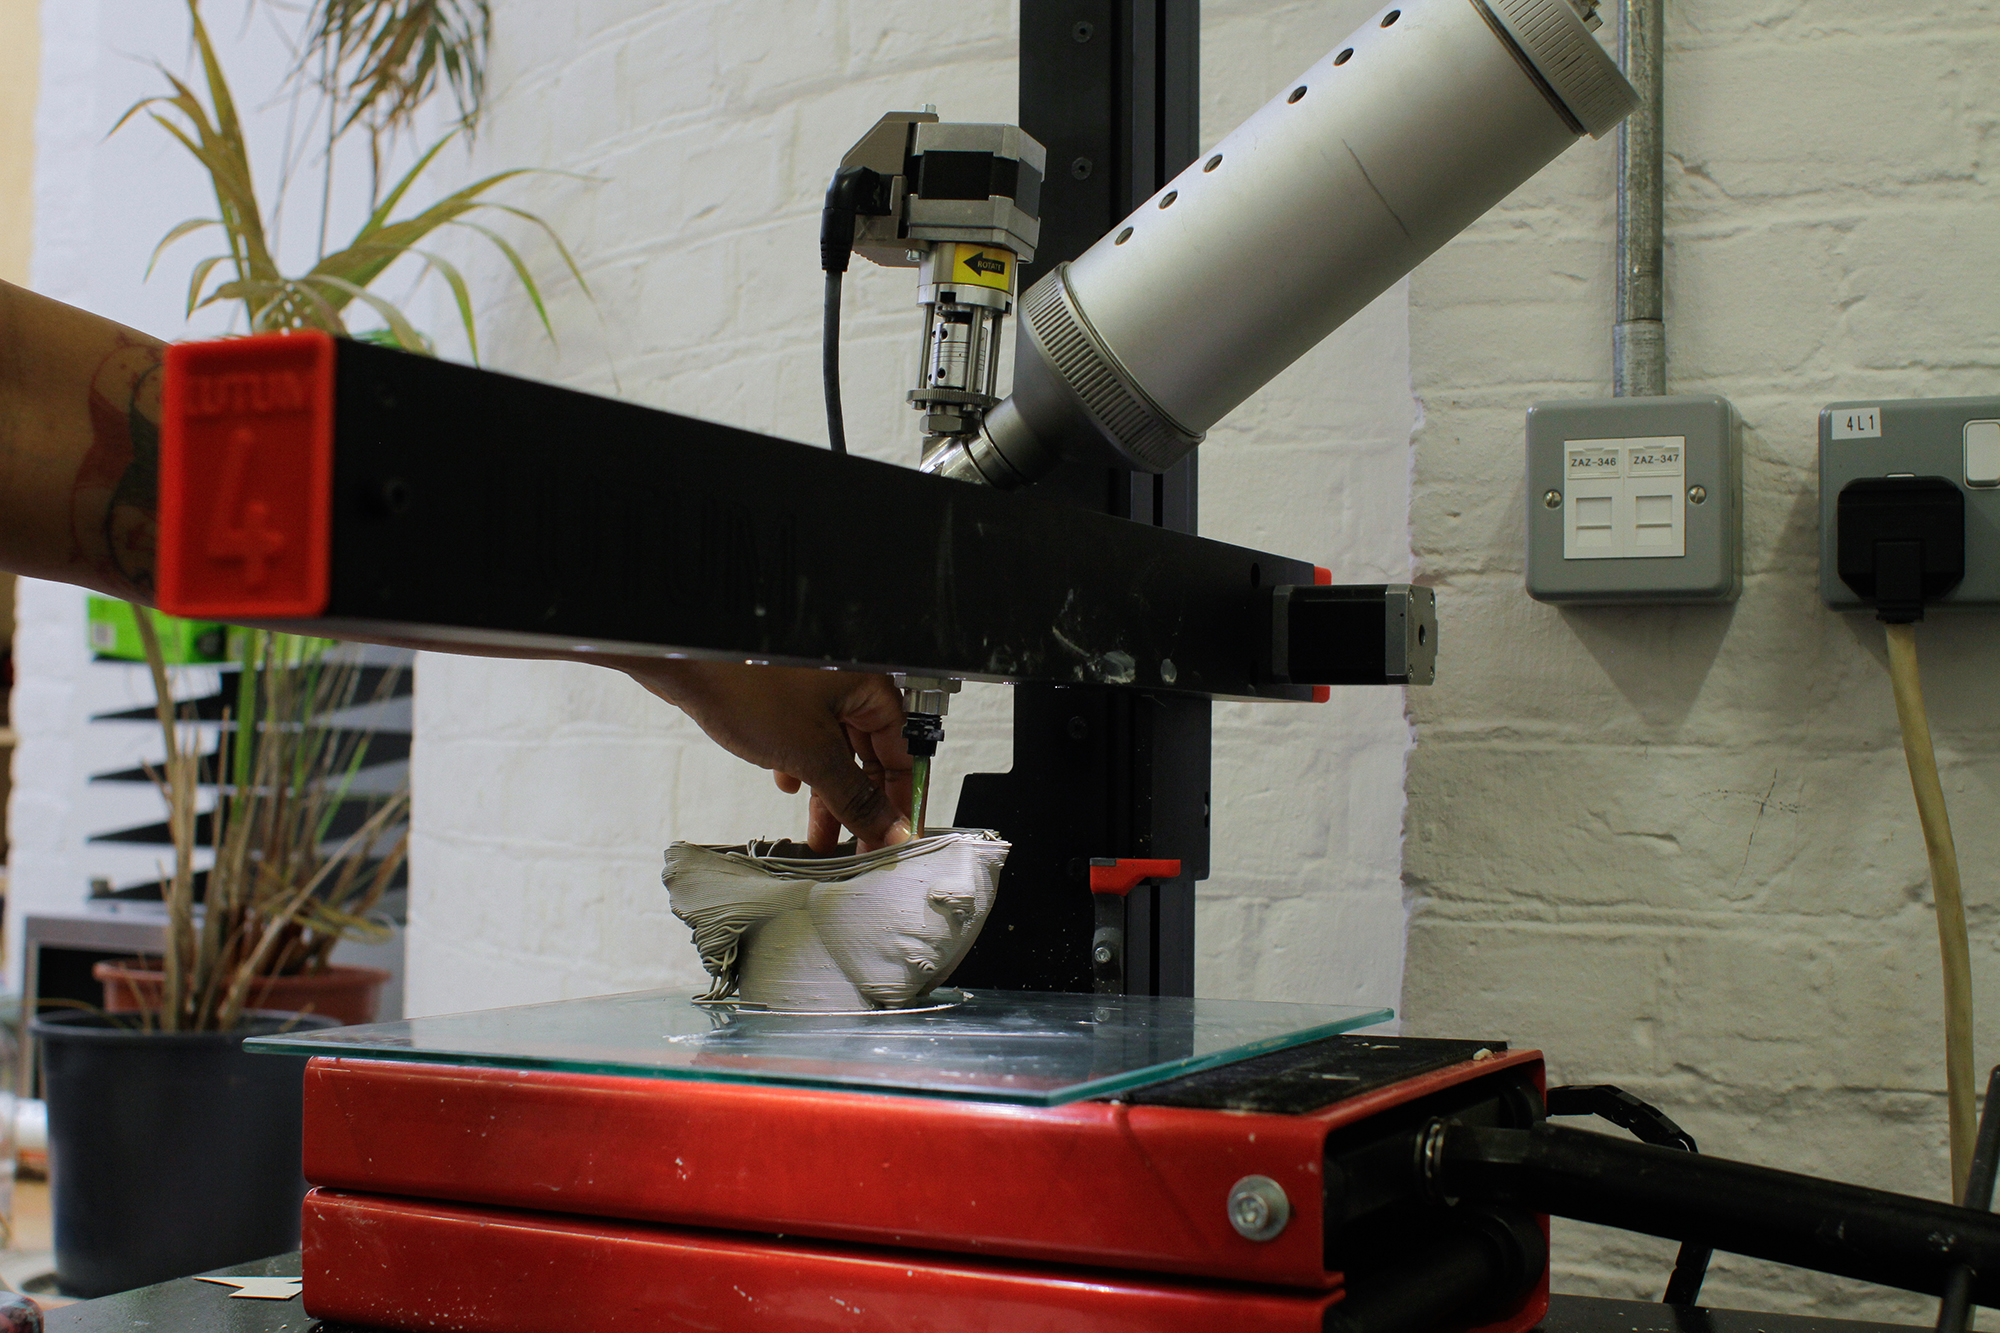 photo of a 3D ceramic printer on a desk, with a piece being printed midway and the artist's hand touching the piece from the left side. The piece on the printer shows two profile faces with closed eyes. Against a white walls with plants in the background on the left side